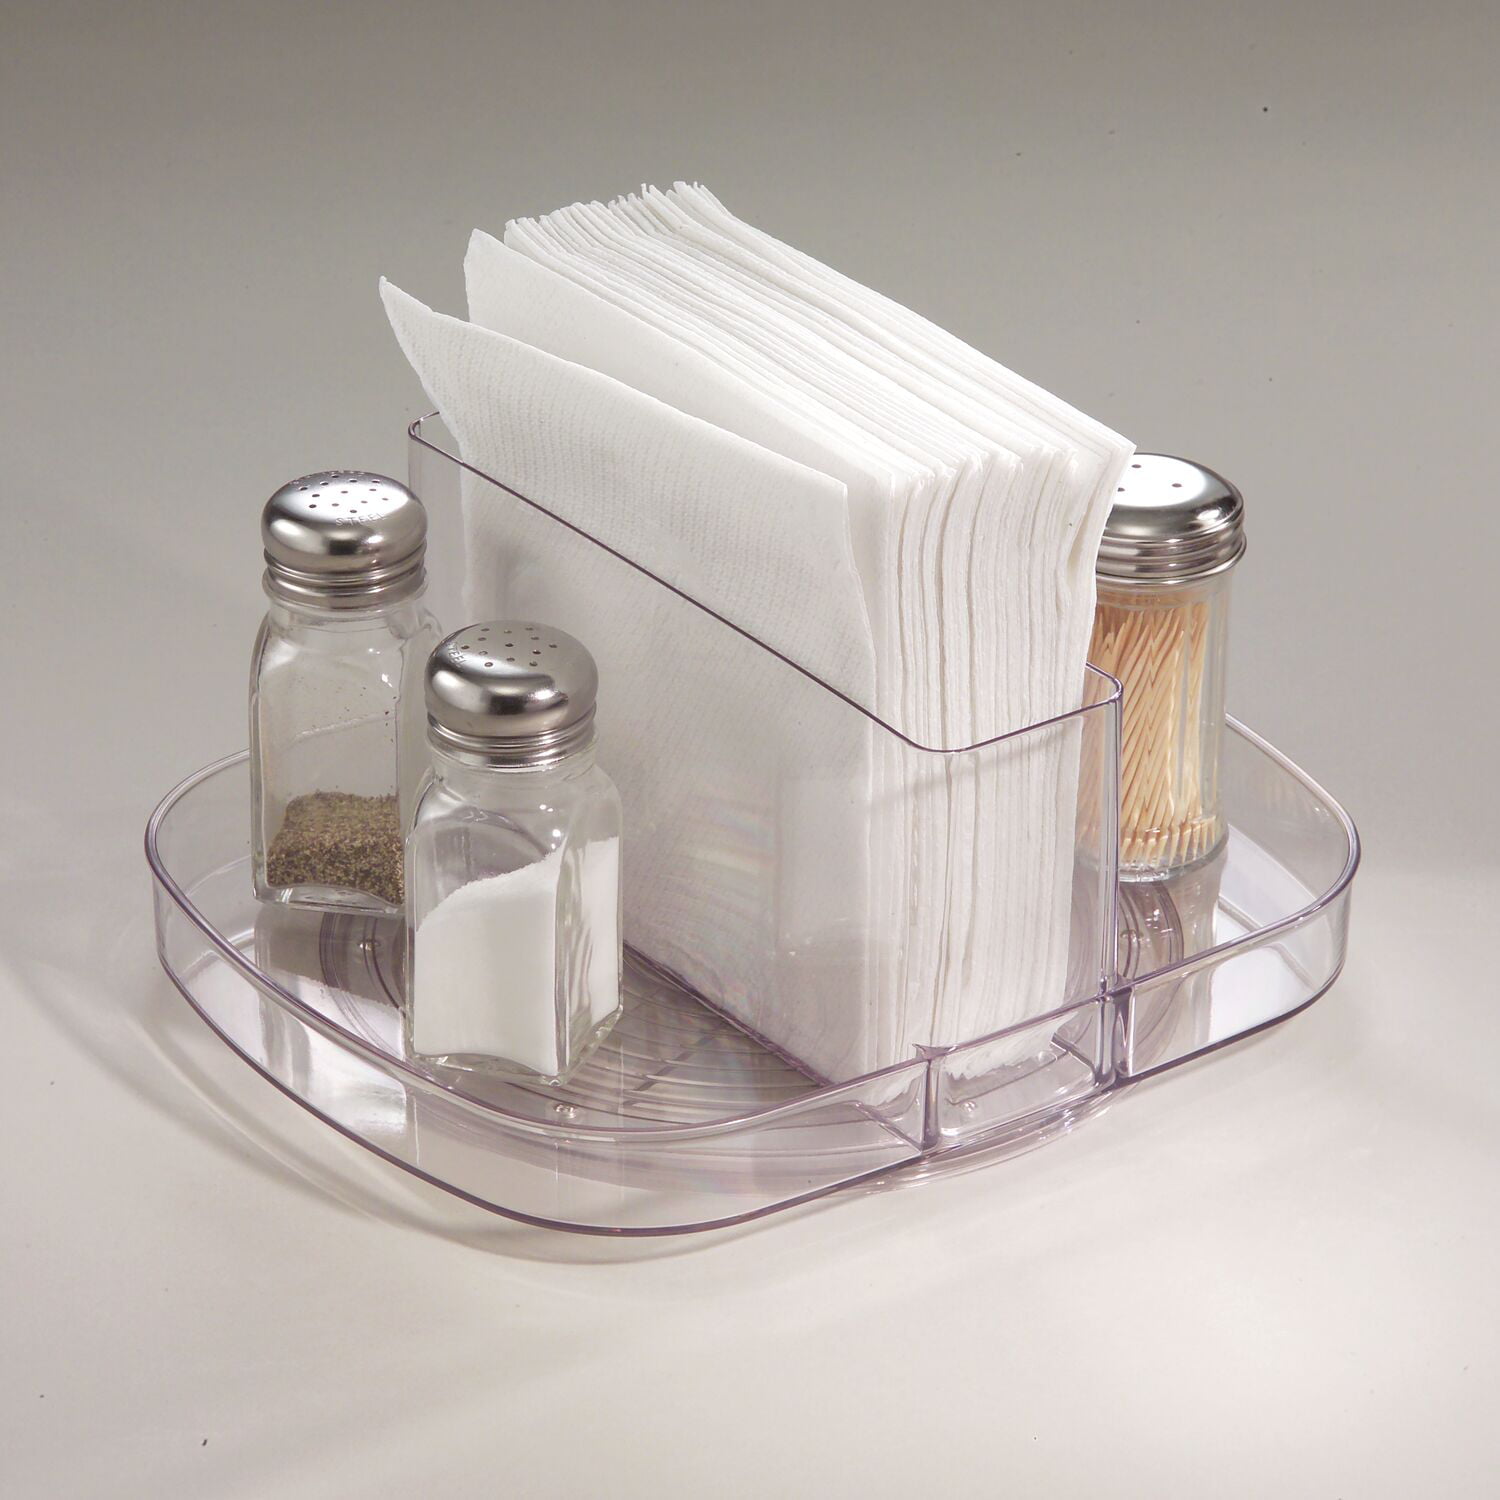 Clear iDesign Linus Plastic Lazy Susan Napkin and Condiments Turntable Holder for Kitchen Countertops and Dining Tables 